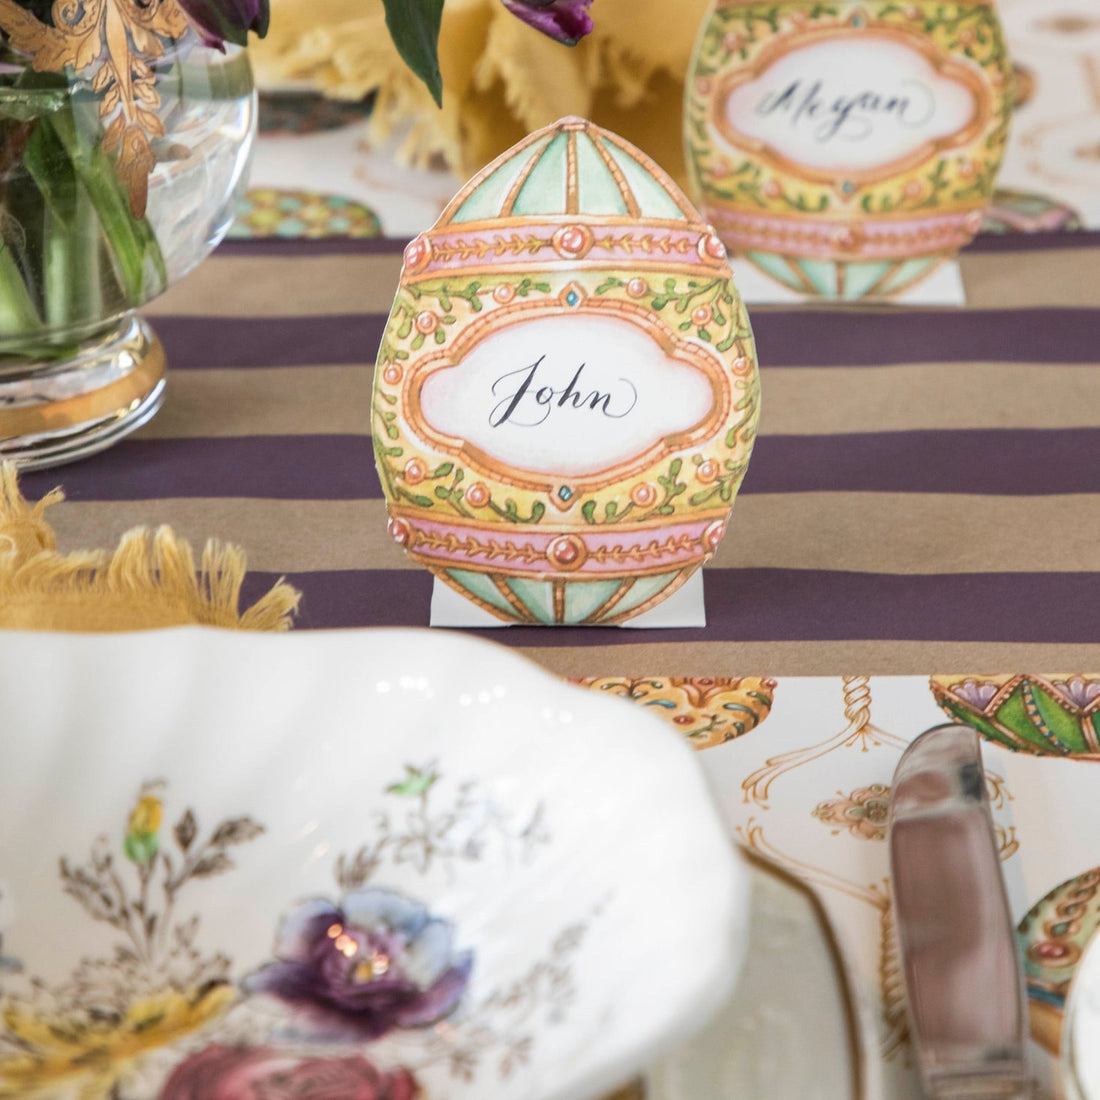 An elegant Easter tablescape featuring an Exquisite Egg Place Card at each place setting.